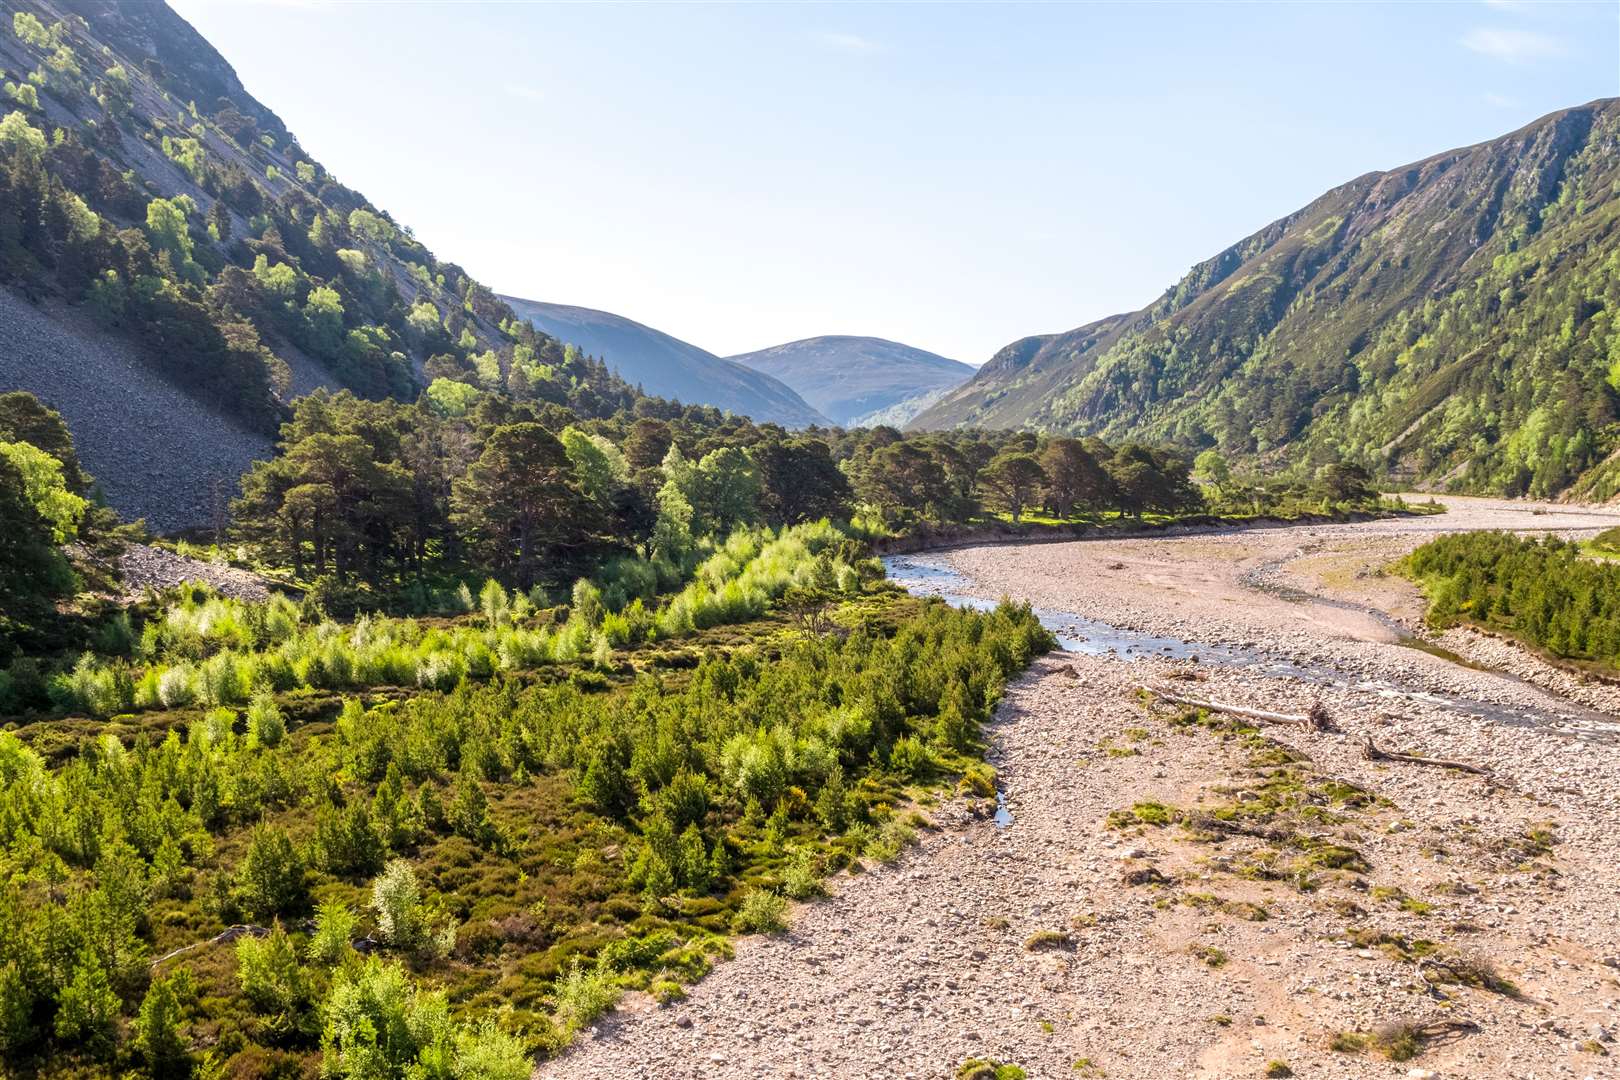 Wild areas such as mountains, moorlands, lochs and rivers and coasts with limited human impact have been labelled as ‘Wild Land Areas’ by NatureScot